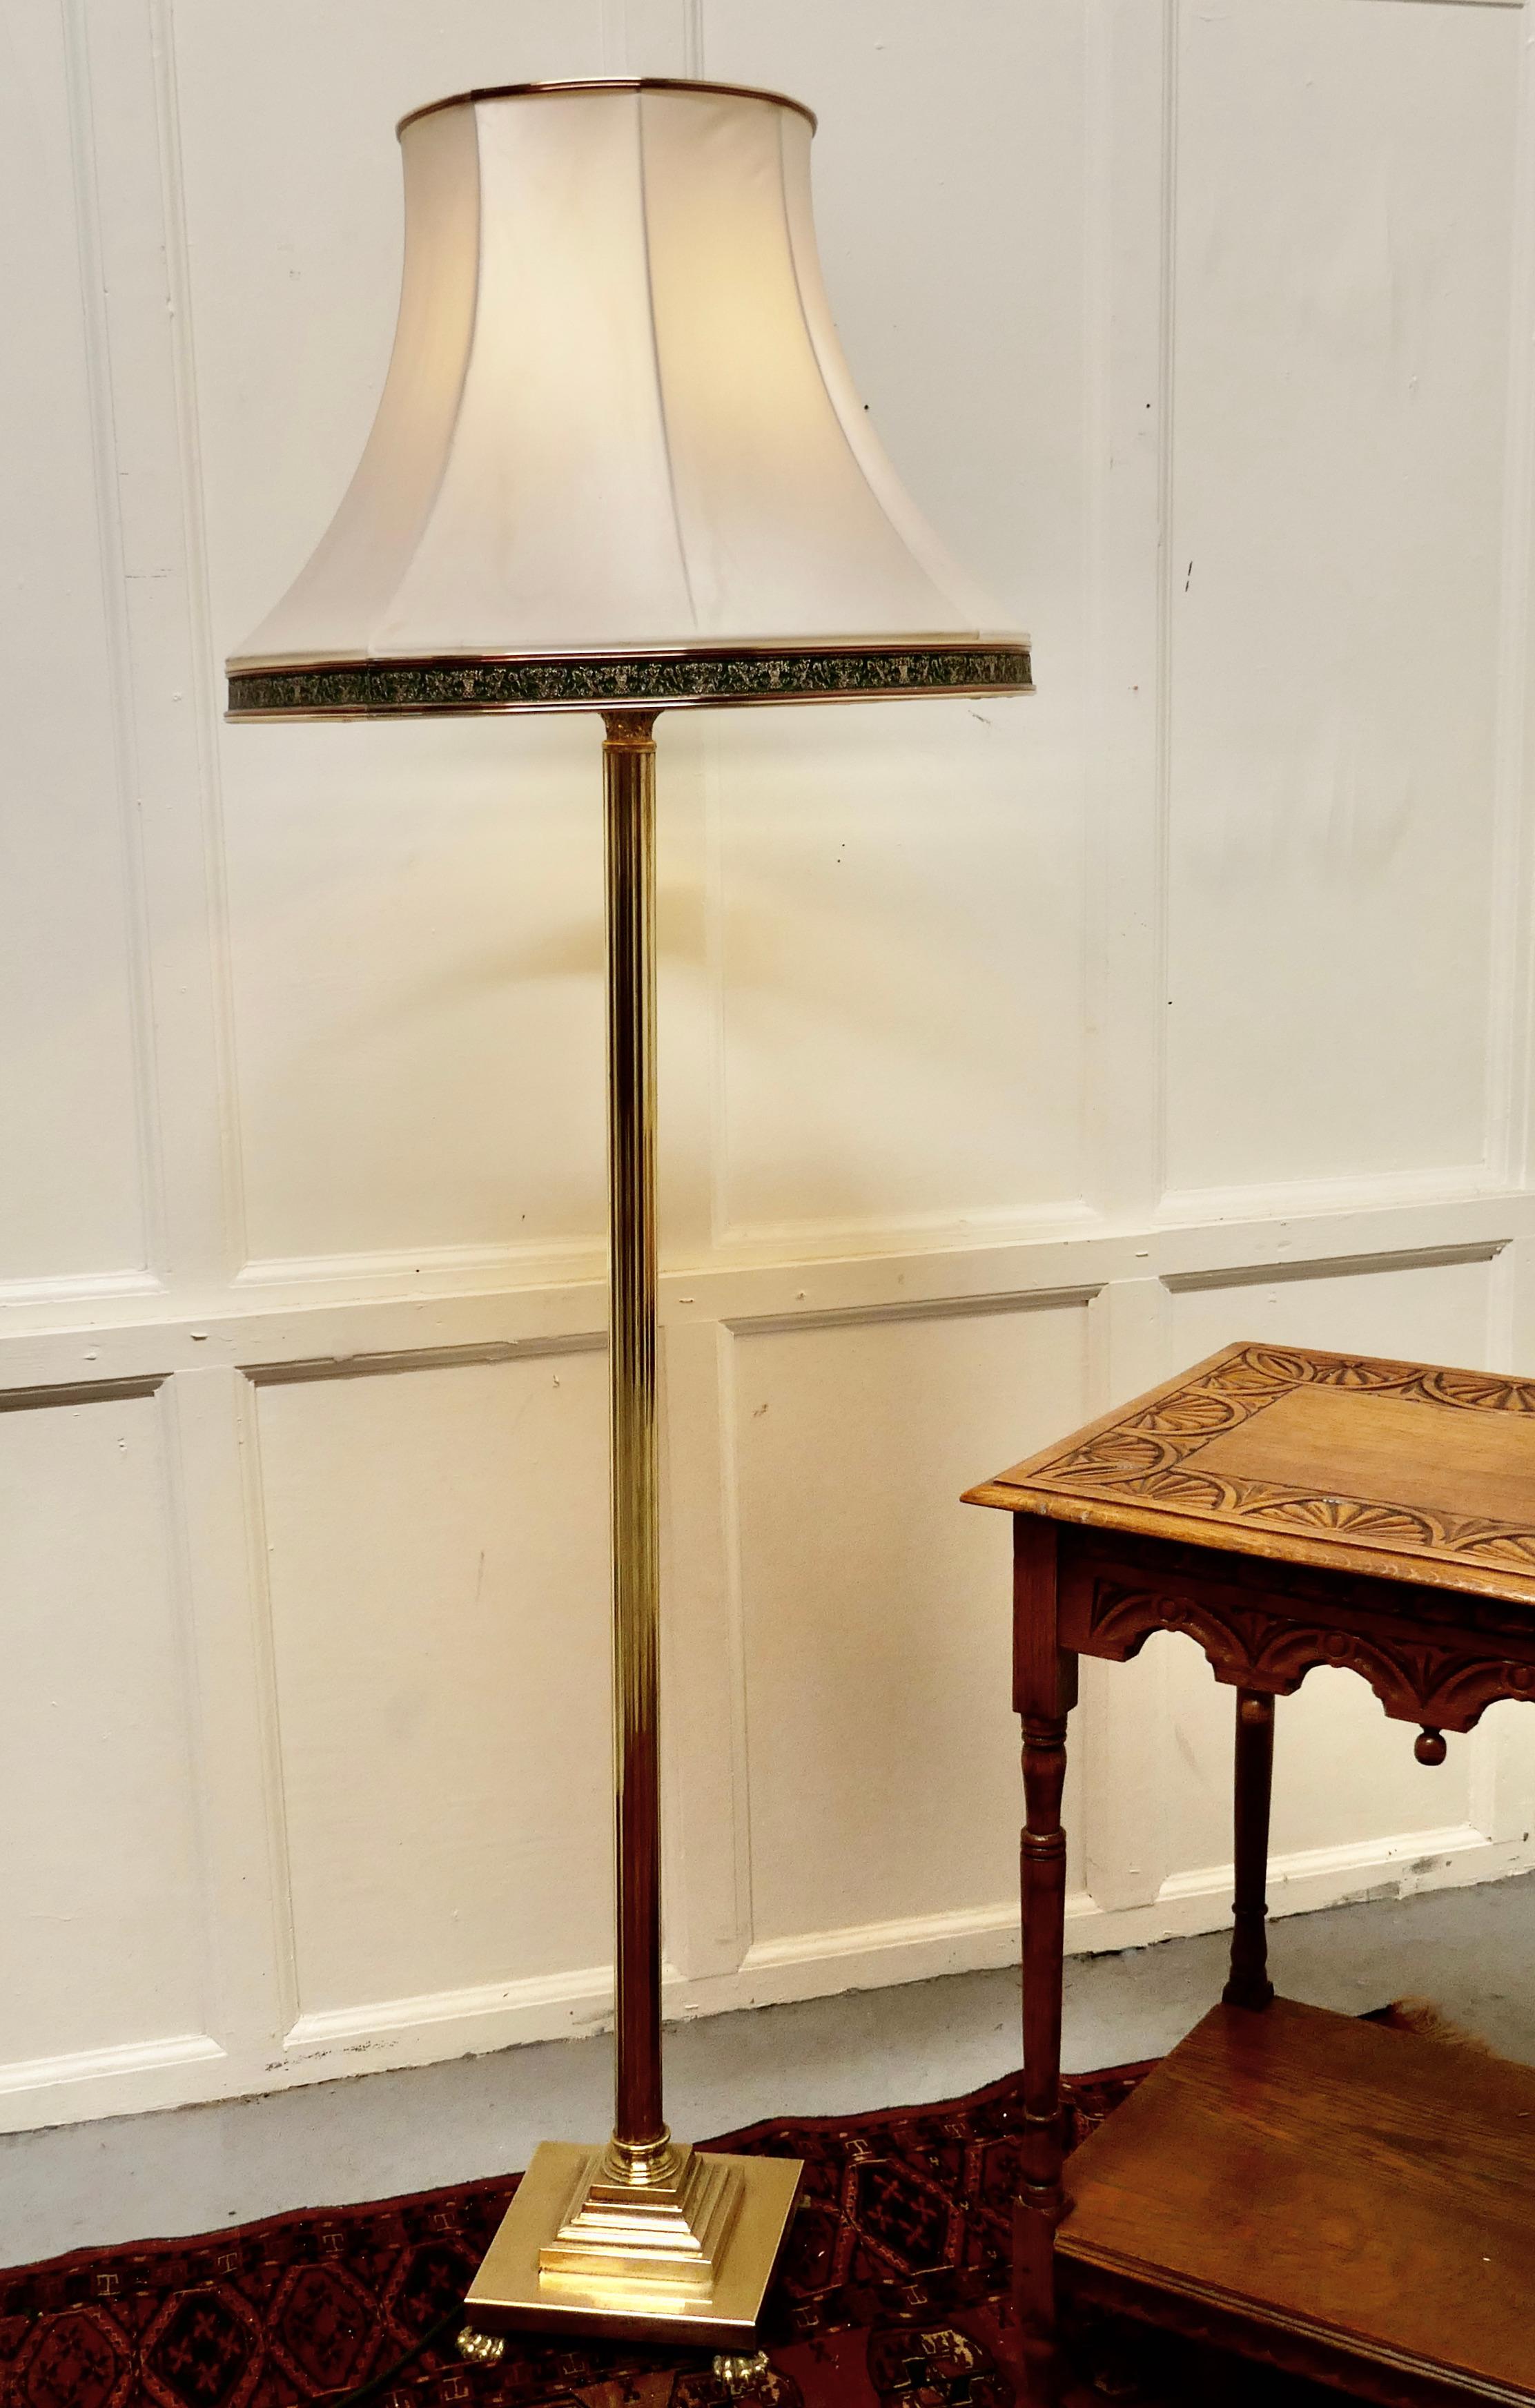 A Corinthian column brass floor lamp

A lovely design the stepped square base is set with lion claw feet on each corner, the lamp has a central Corinthian column also in brass
The lamp is in good condition with new wiring it has its original